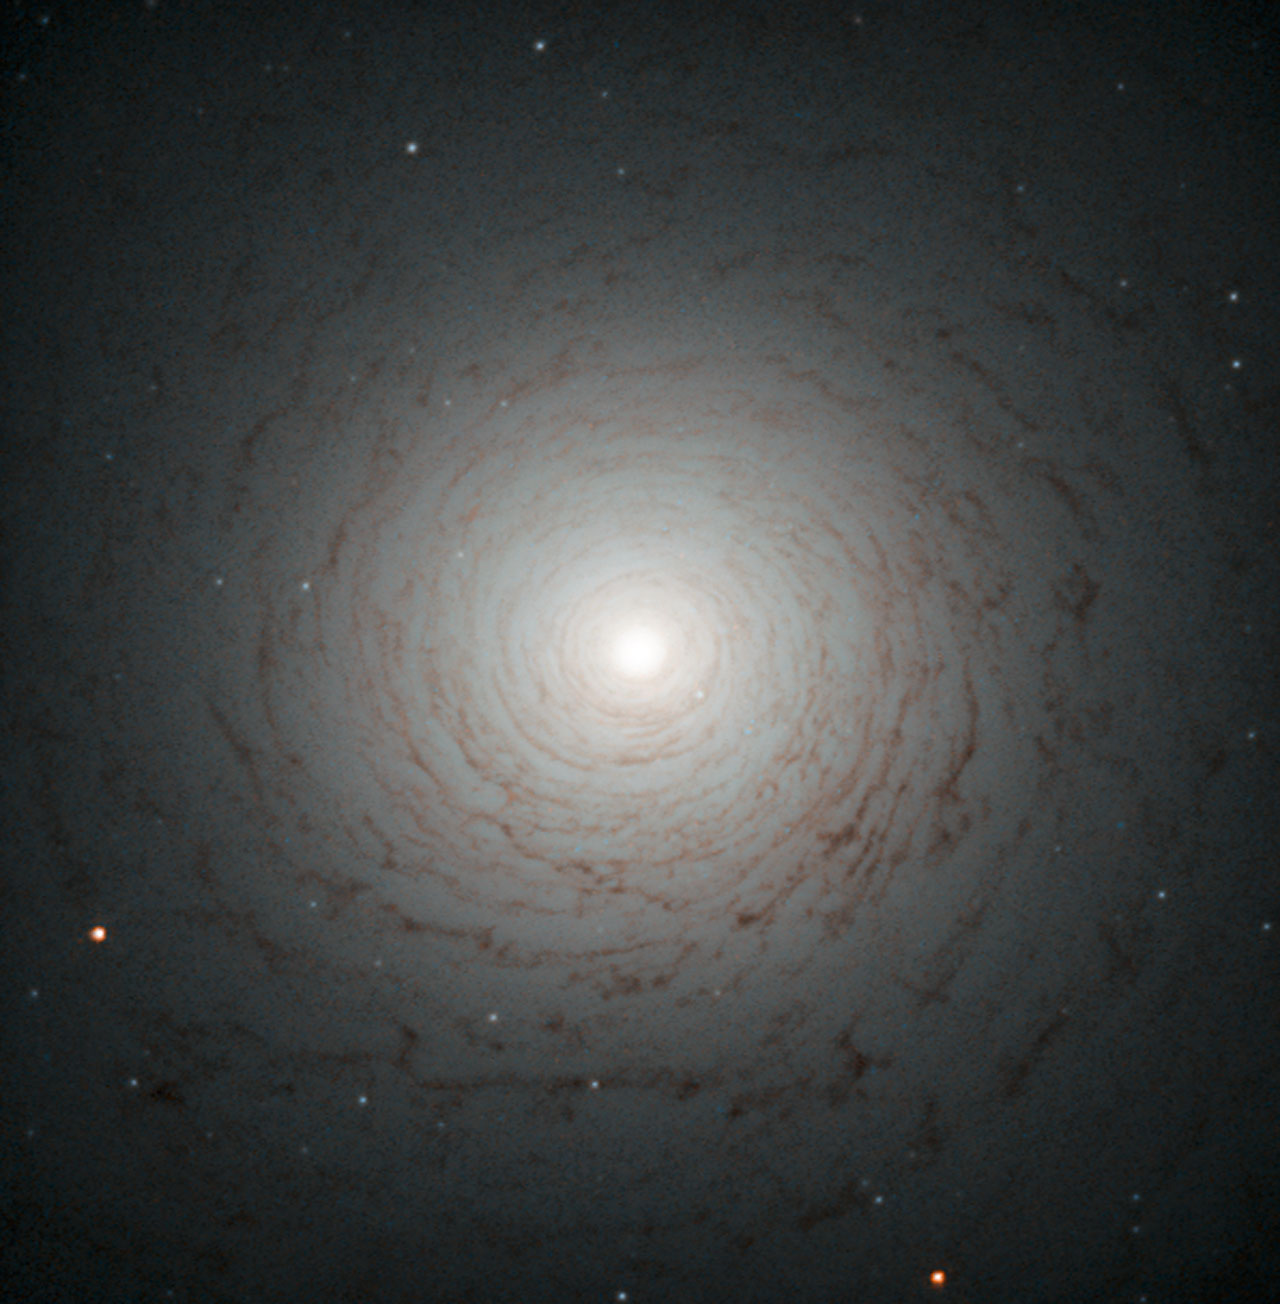 This striking cosmic whirl is the centre of galaxy NGC 524, as seen with the NASA/ESA Hubble Space Telescope. This galaxy is located in the constellation of Pisces, some 90 million light-years from Earth. NGC 524 is a lenticular galaxy. Lenticular galaxies are believed to be an intermediate state in galactic evolution — they are neither elliptical nor spiral. Spirals are middle-aged galaxies with vast, pinwheeling arms that contain millions of stars. Along with these stars are large clouds of gas and dust that, when dense enough, are the nurseries where new stars are born. When all the gas is either depleted or lost into space, the arms gradually fade away and the spiral shape begins to weaken. At the end of this process, what remains is a lenticular galaxy — a bright disc full of old, red stars surrounded by what little gas and dust the galaxy has managed to cling on to. This image shows the shape of NGC 524 in detail, formed by the remaining gas surrounding the galaxy’s central bulge. Observations of this galaxy have revealed that it maintains some spiral-like motion, explaining its intricate structure. A version of this image was entered into the Hubble’s Hidden Treasures image processing competition by contestant Judy Schmidt.